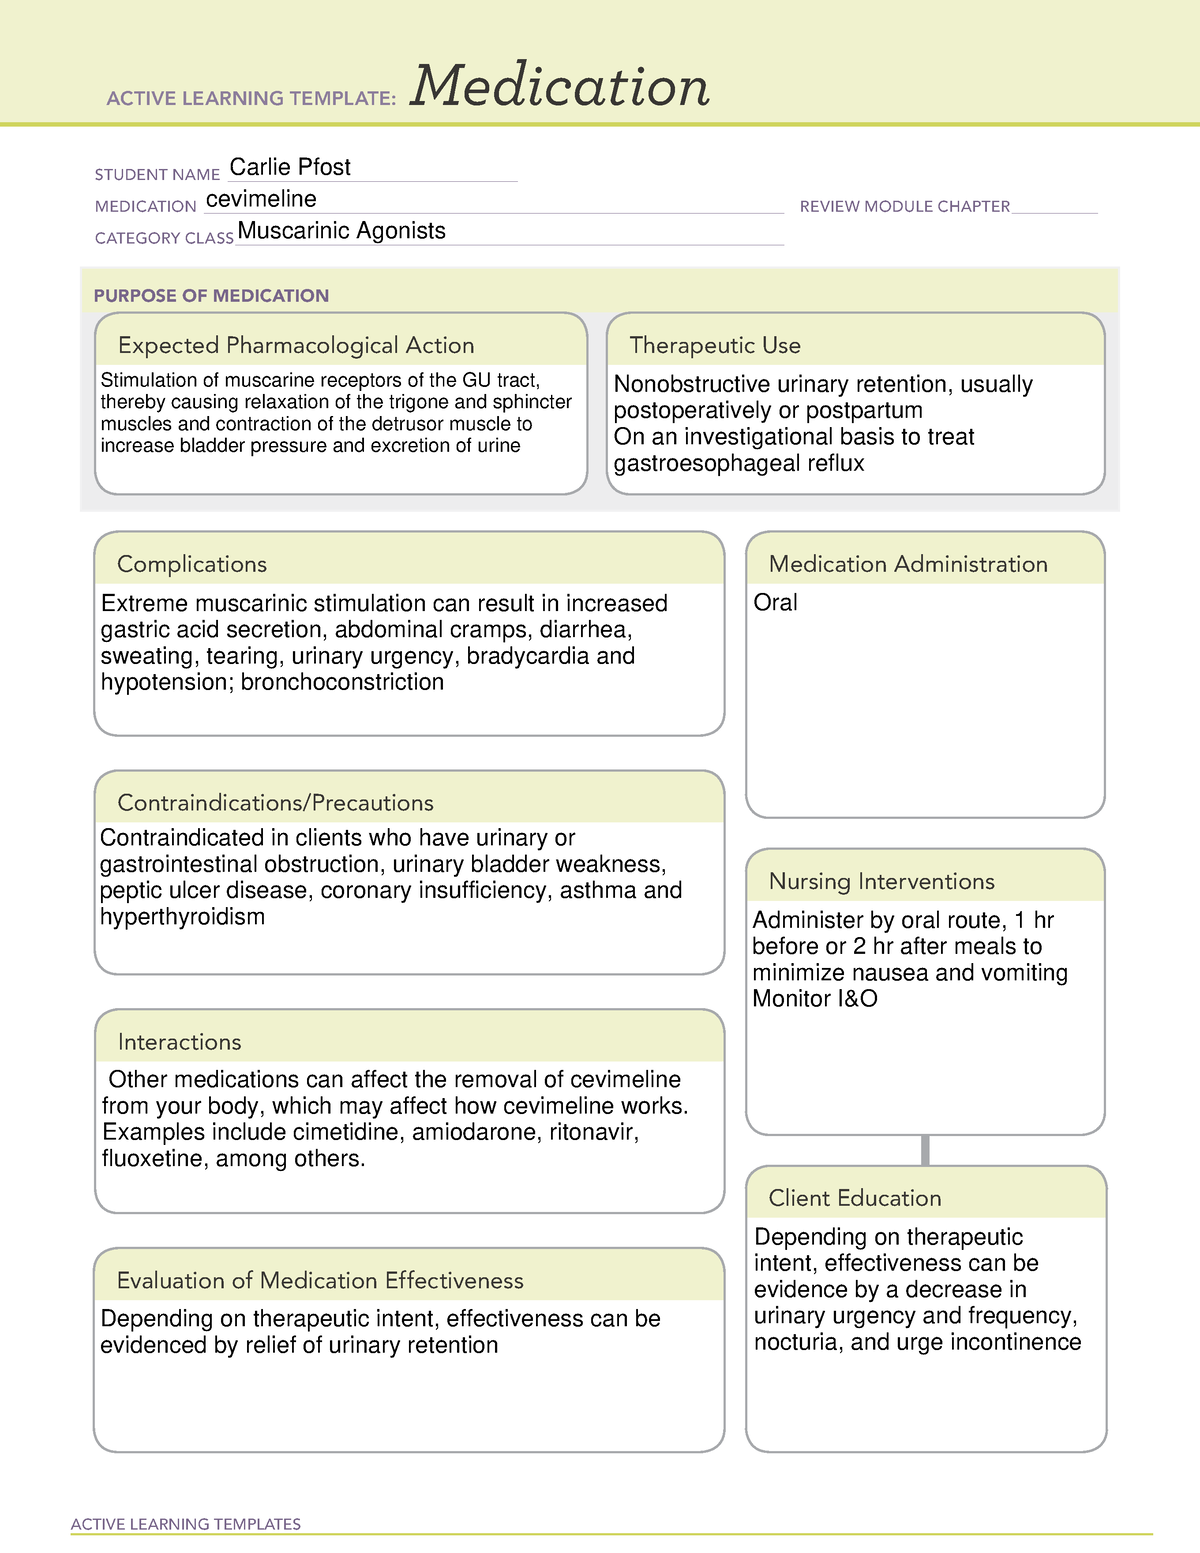 Medication template 9 ACTIVE LEARNING TEMPLATES Medication STUDENT